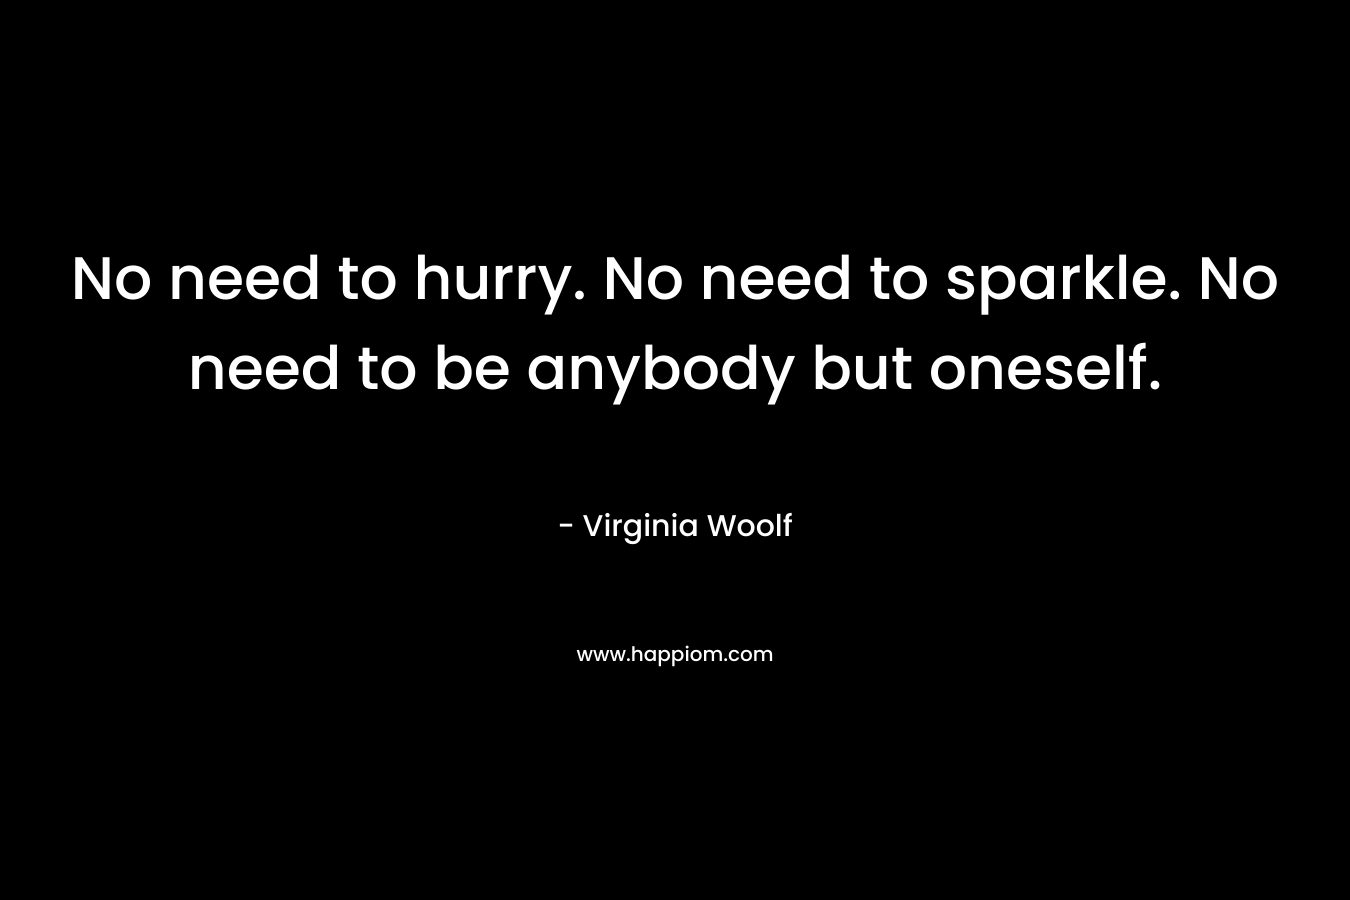 No need to hurry. No need to sparkle. No need to be anybody but oneself. – Virginia Woolf